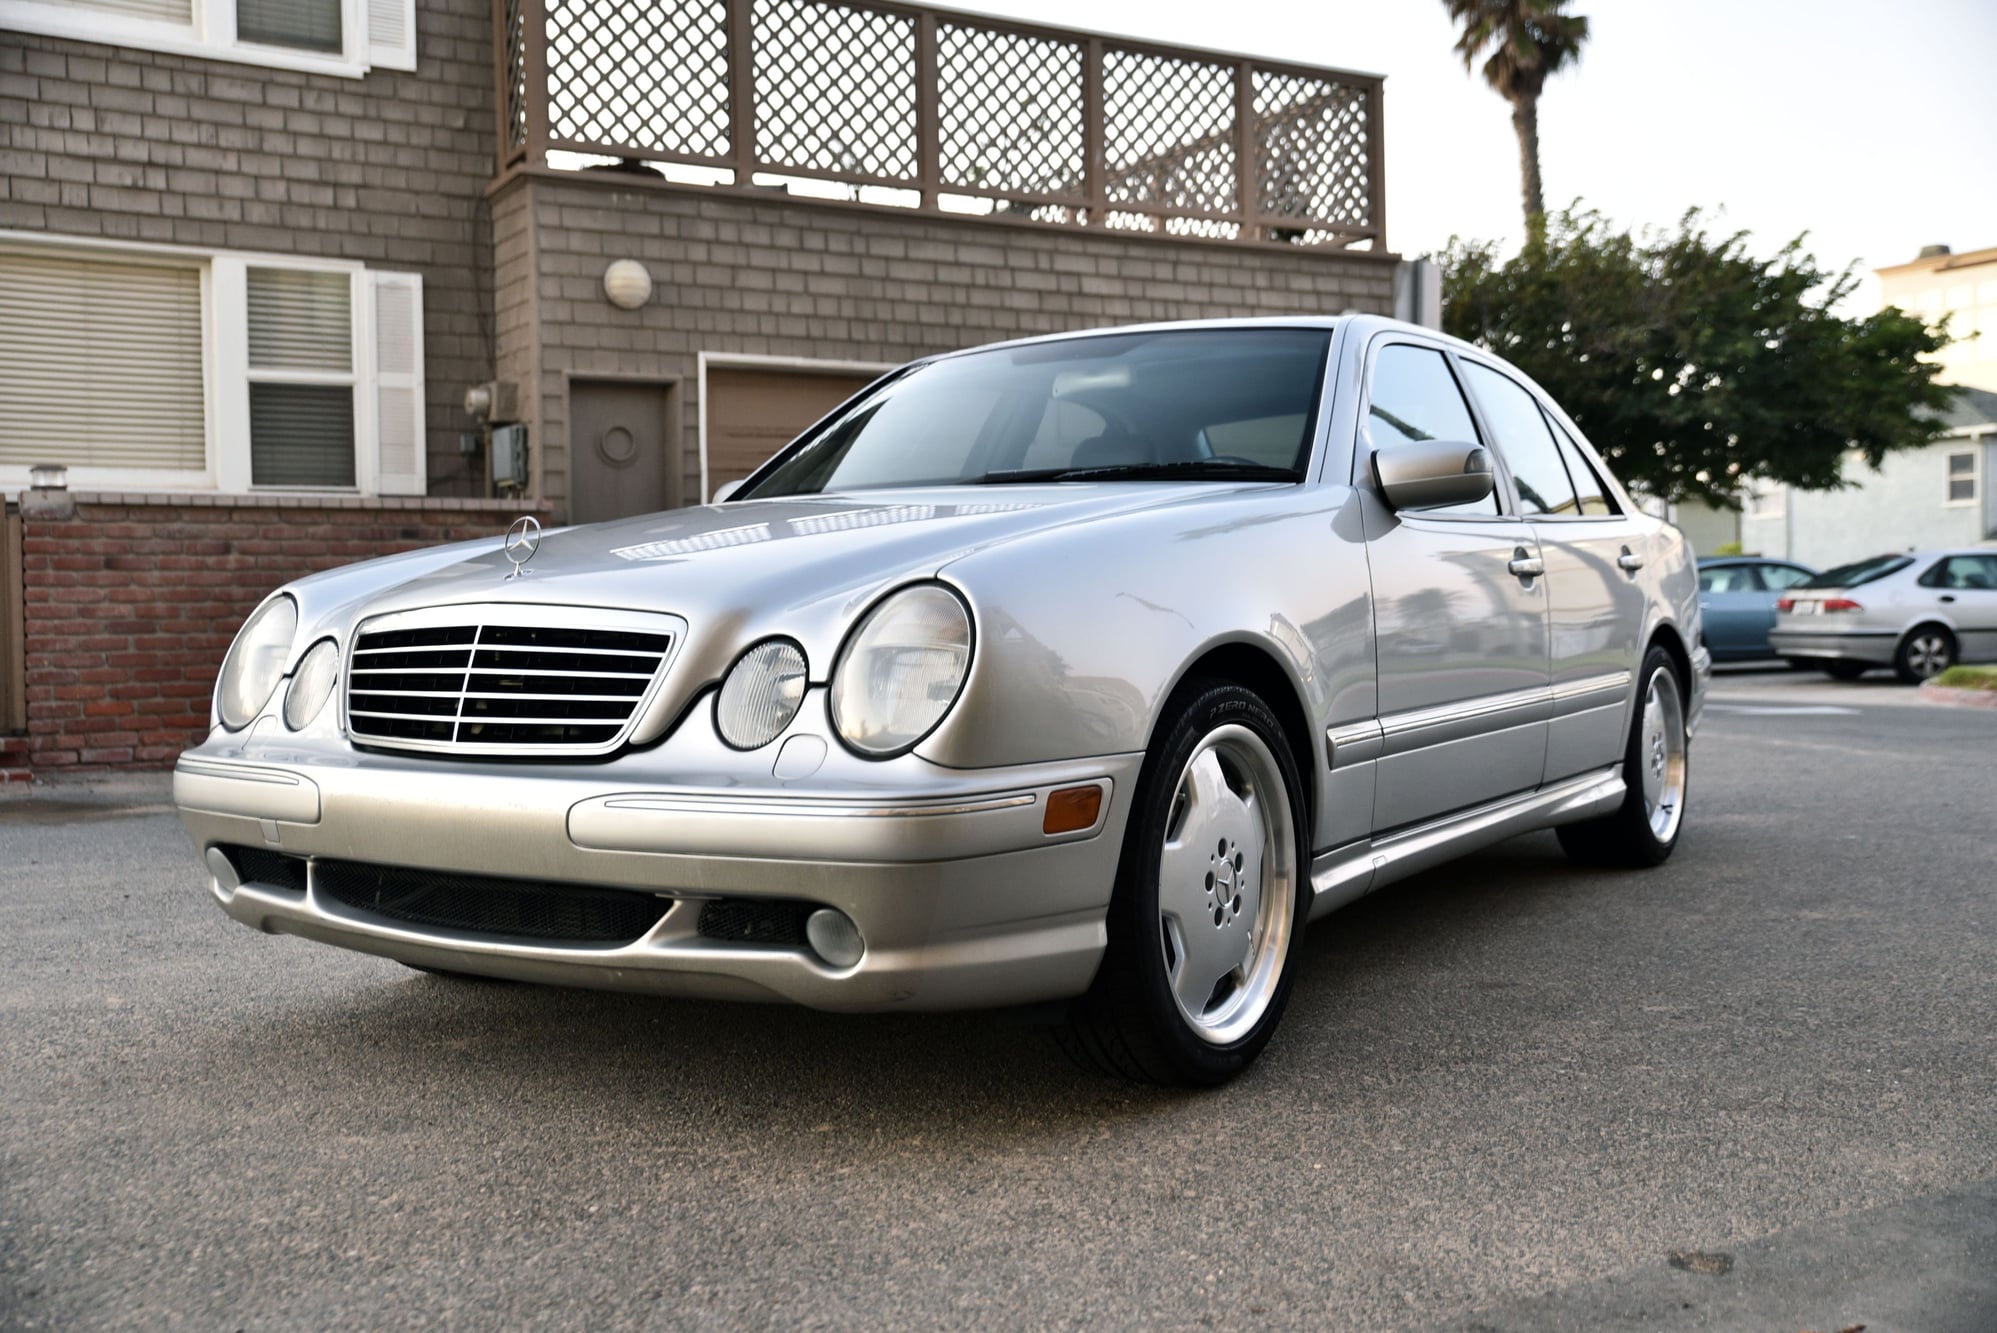 2002 Mercedes-Benz E55 AMG - 2002 Mercedes-Benz E55 AMG | 2nd Owner | Excellent Condition | Los Angeles/San Diego - Used - VIN WDBJF74J42B456894 - 58,100 Miles - 8 cyl - 2WD - Automatic - Sedan - Silver - Los Angeles, CA 90638, United States